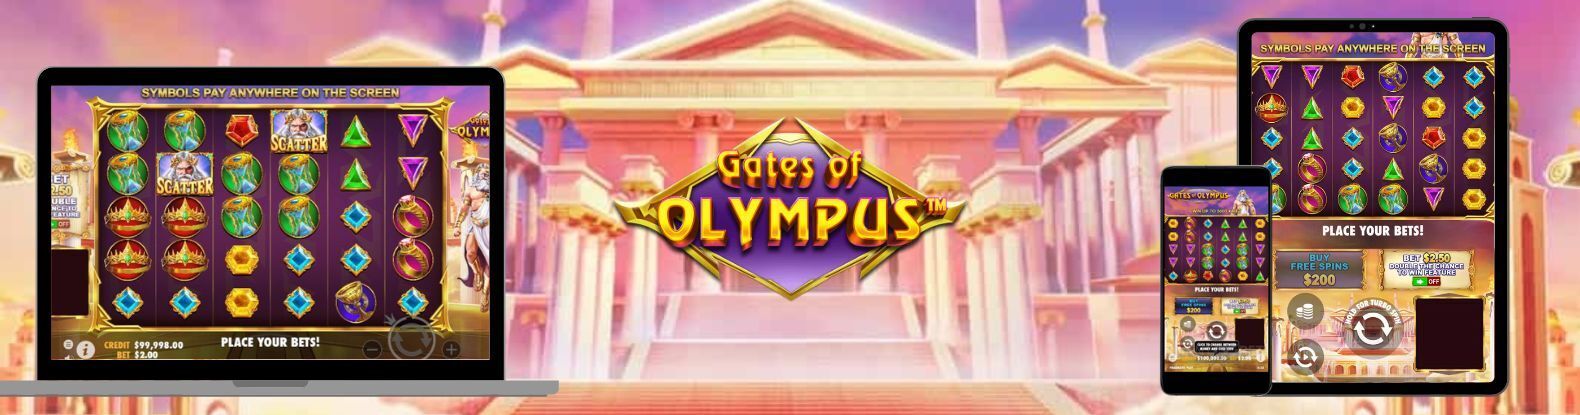 Play Gates of Olympus on Mobile